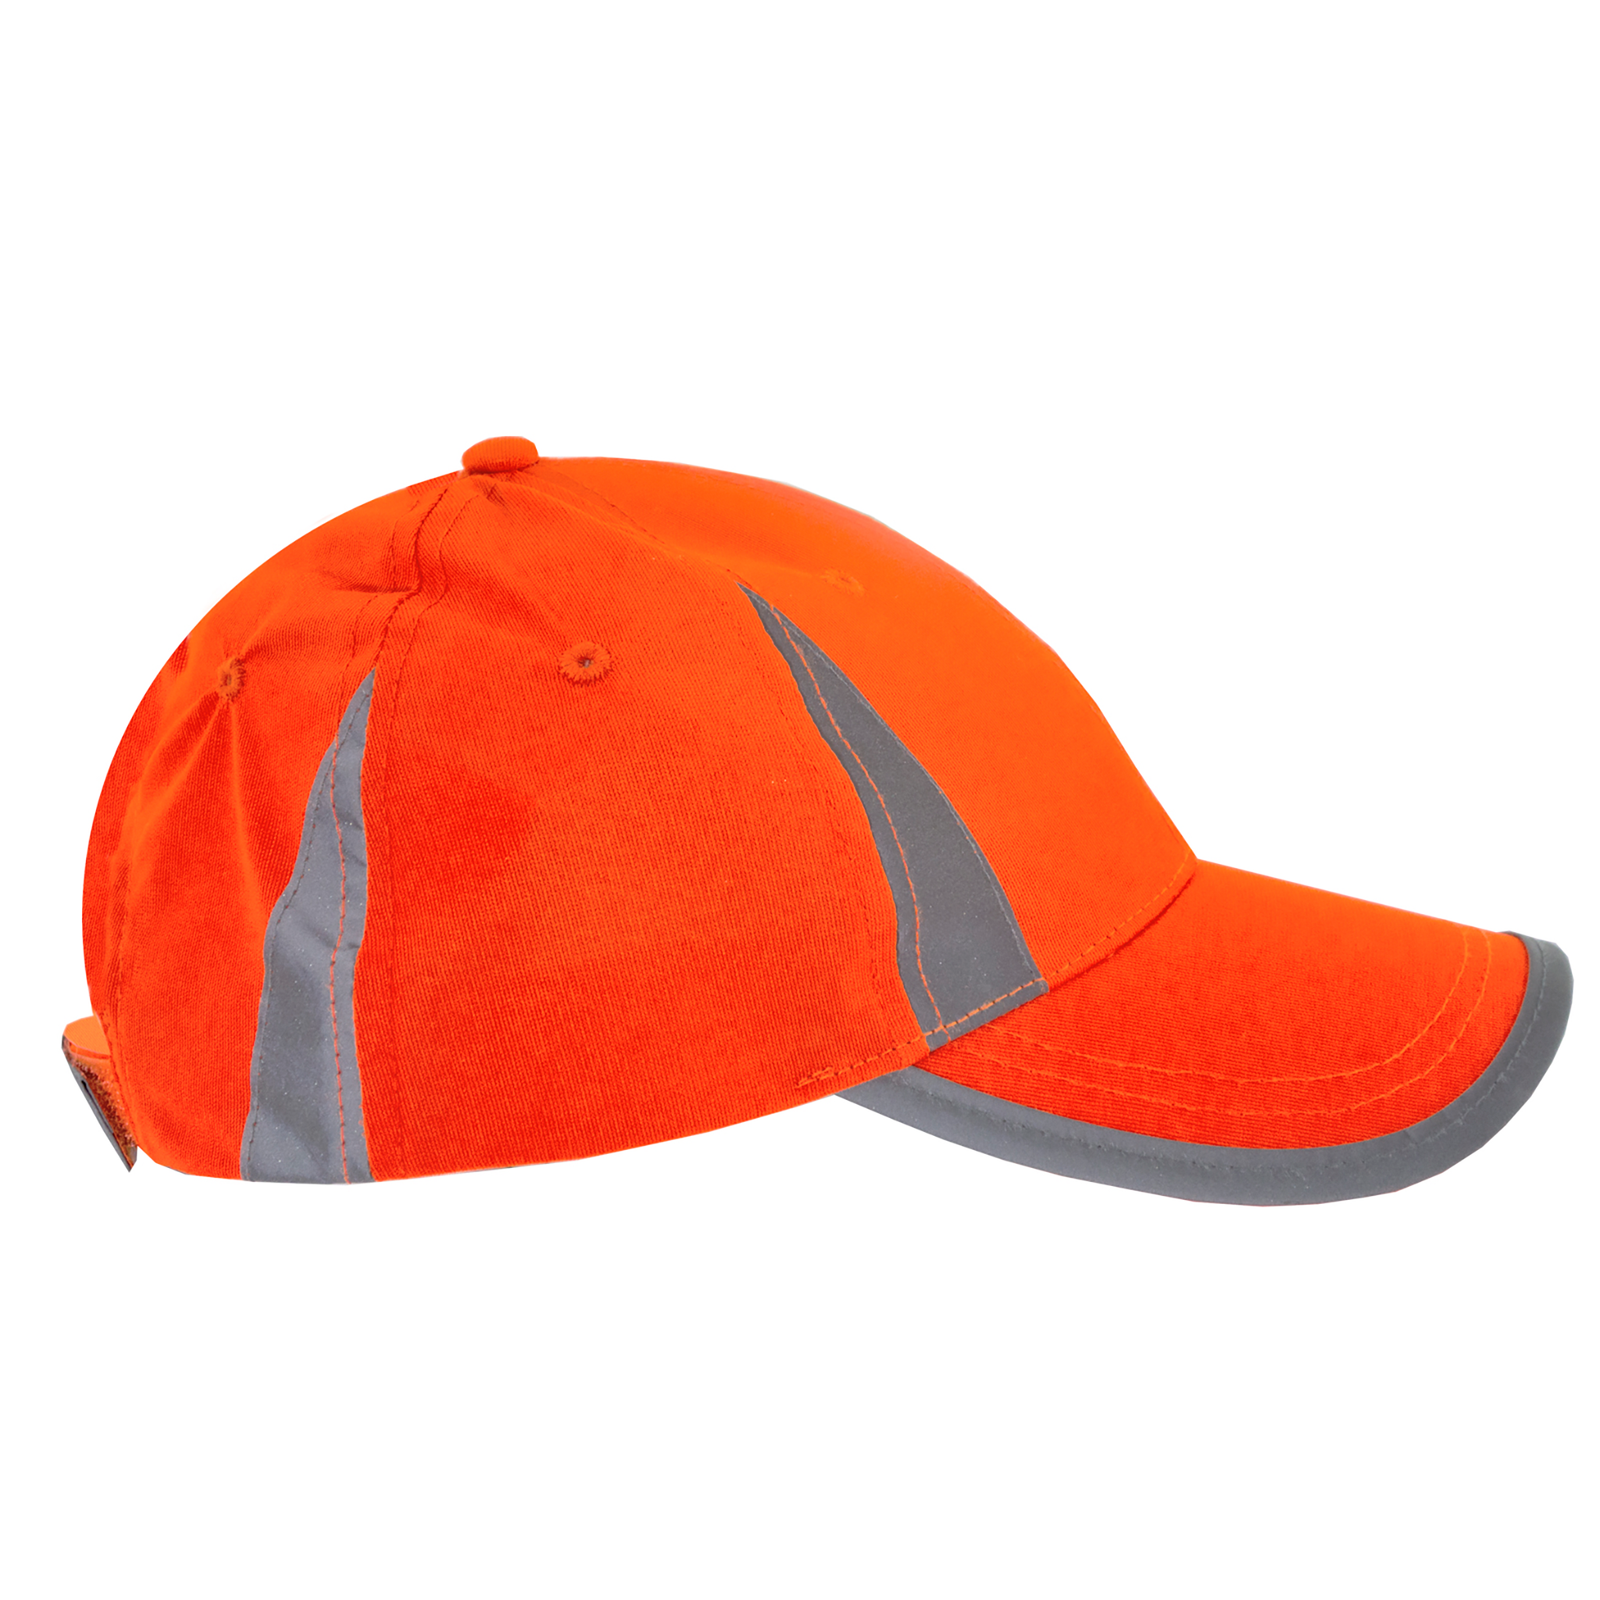 Side view of the Hi-vis orange JORESTECH safety cap with reflective stripes